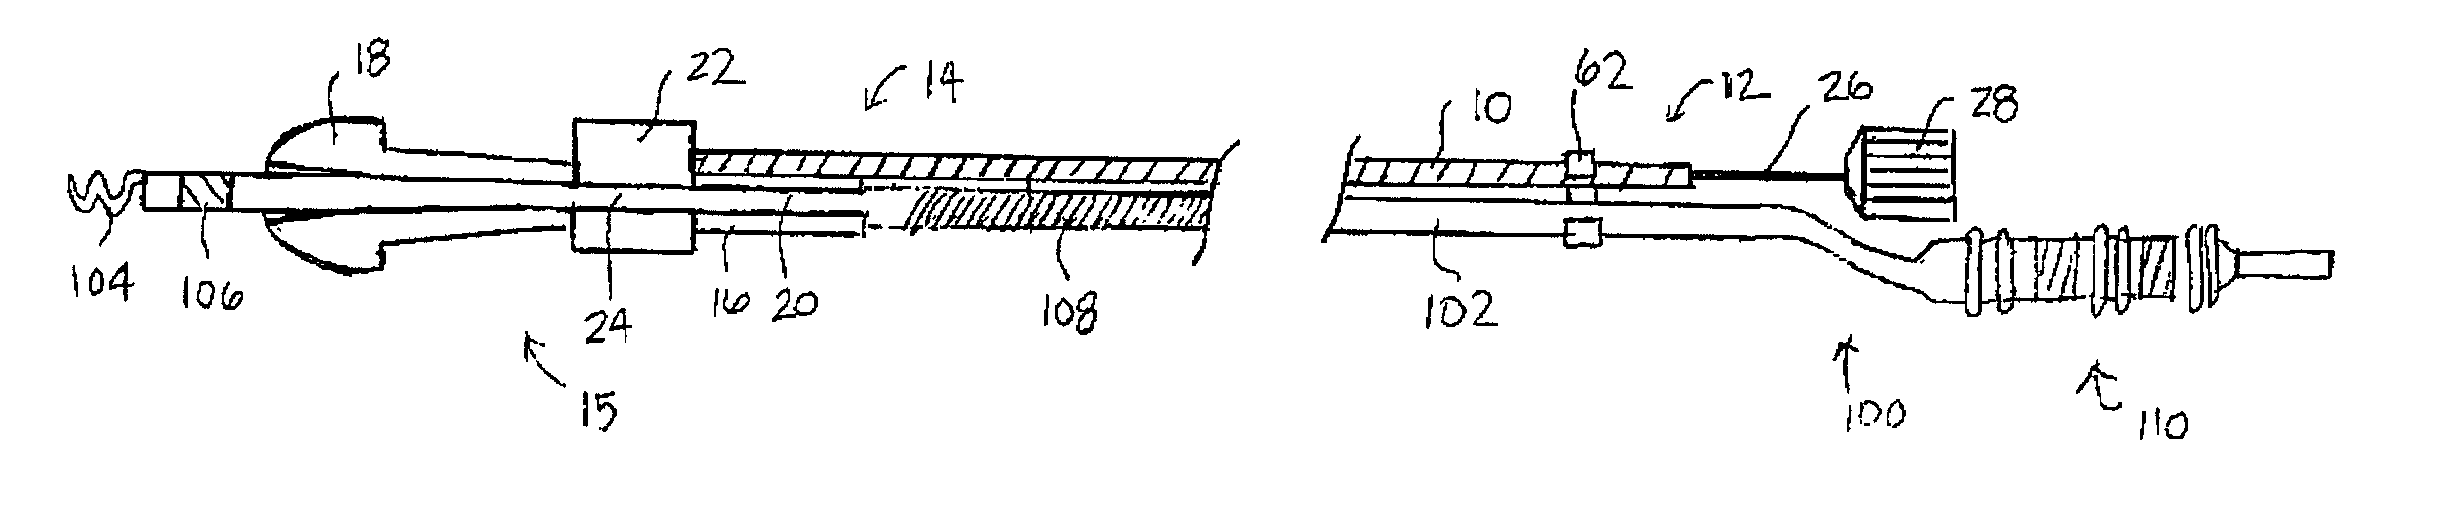 Non-sheath based medical device delivery system